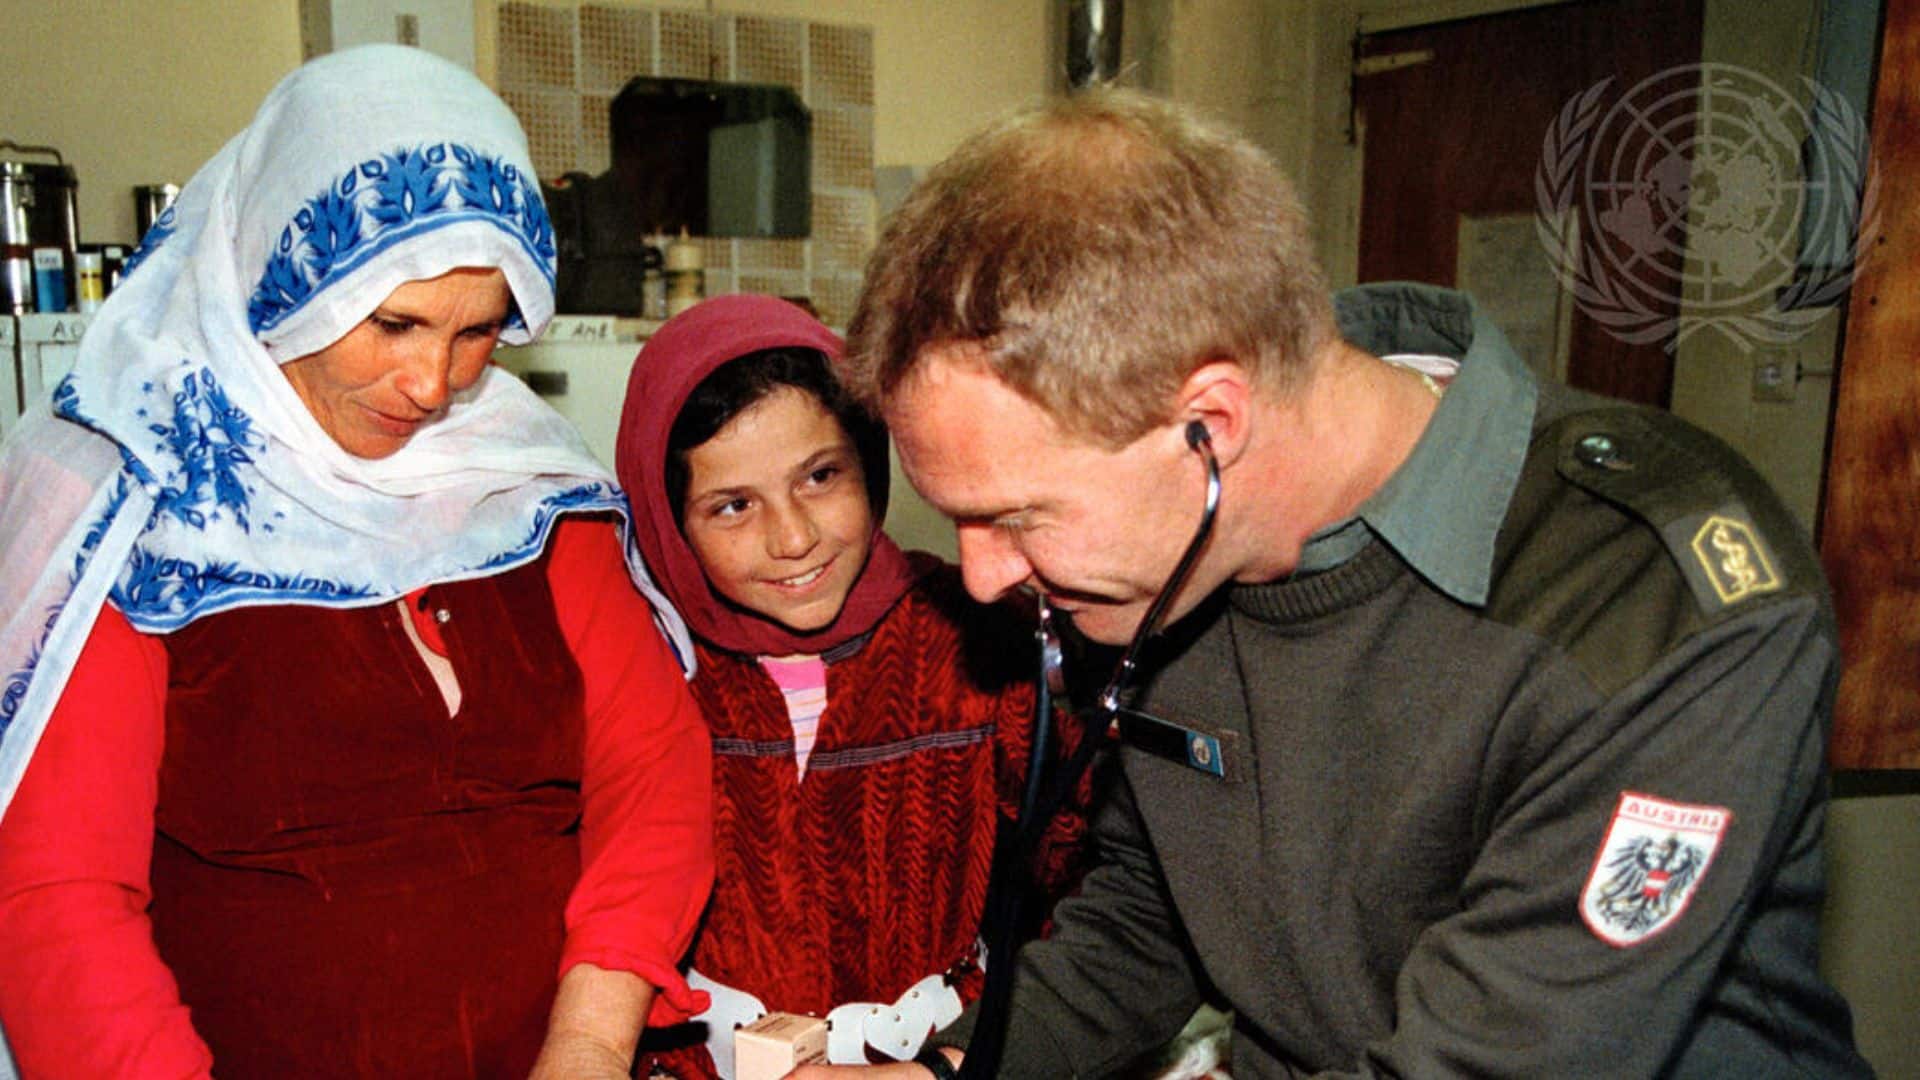 A United Nations humanitarian aid worker checks the heartbeat of a baby, while two women look on fondly